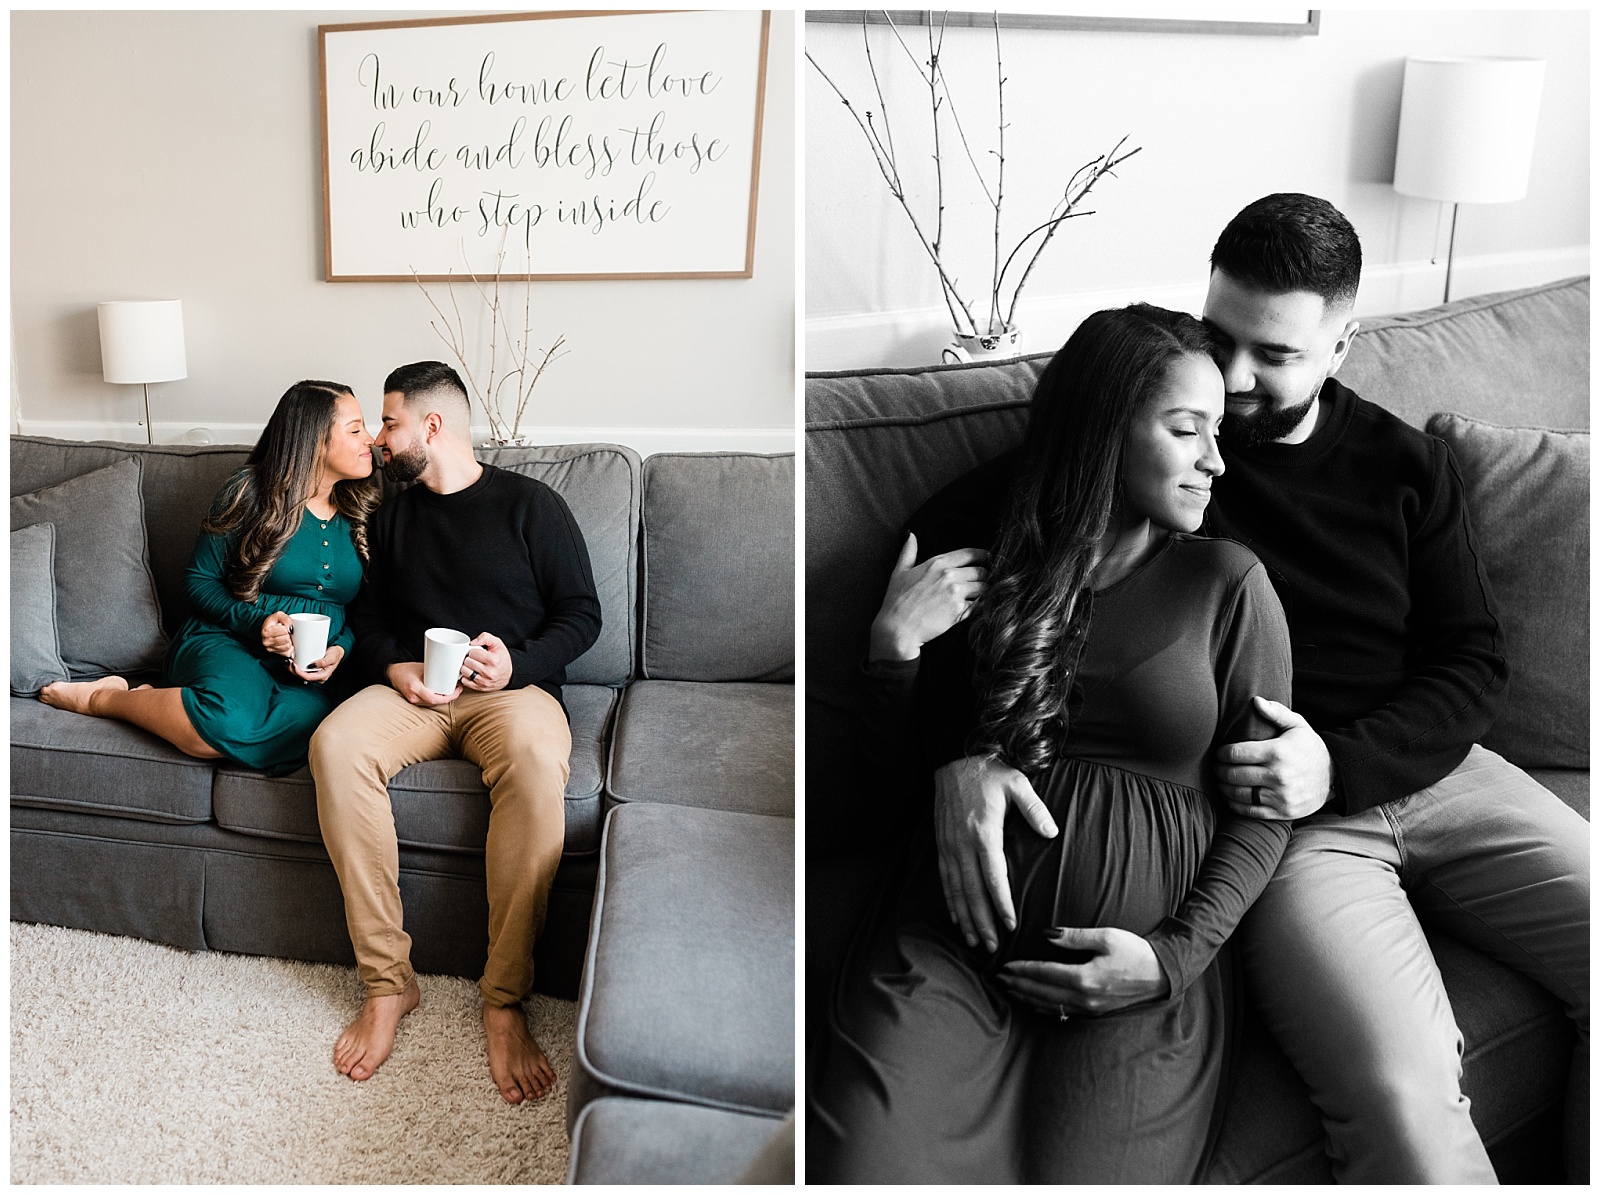 In Home Maternity Session, Nursery, Baby, New Parents, Maternity Shoot, Pregnant, Pregnancy Photos, New Jersey, Photographer, Baby Boy, Coffee, couch, Photo